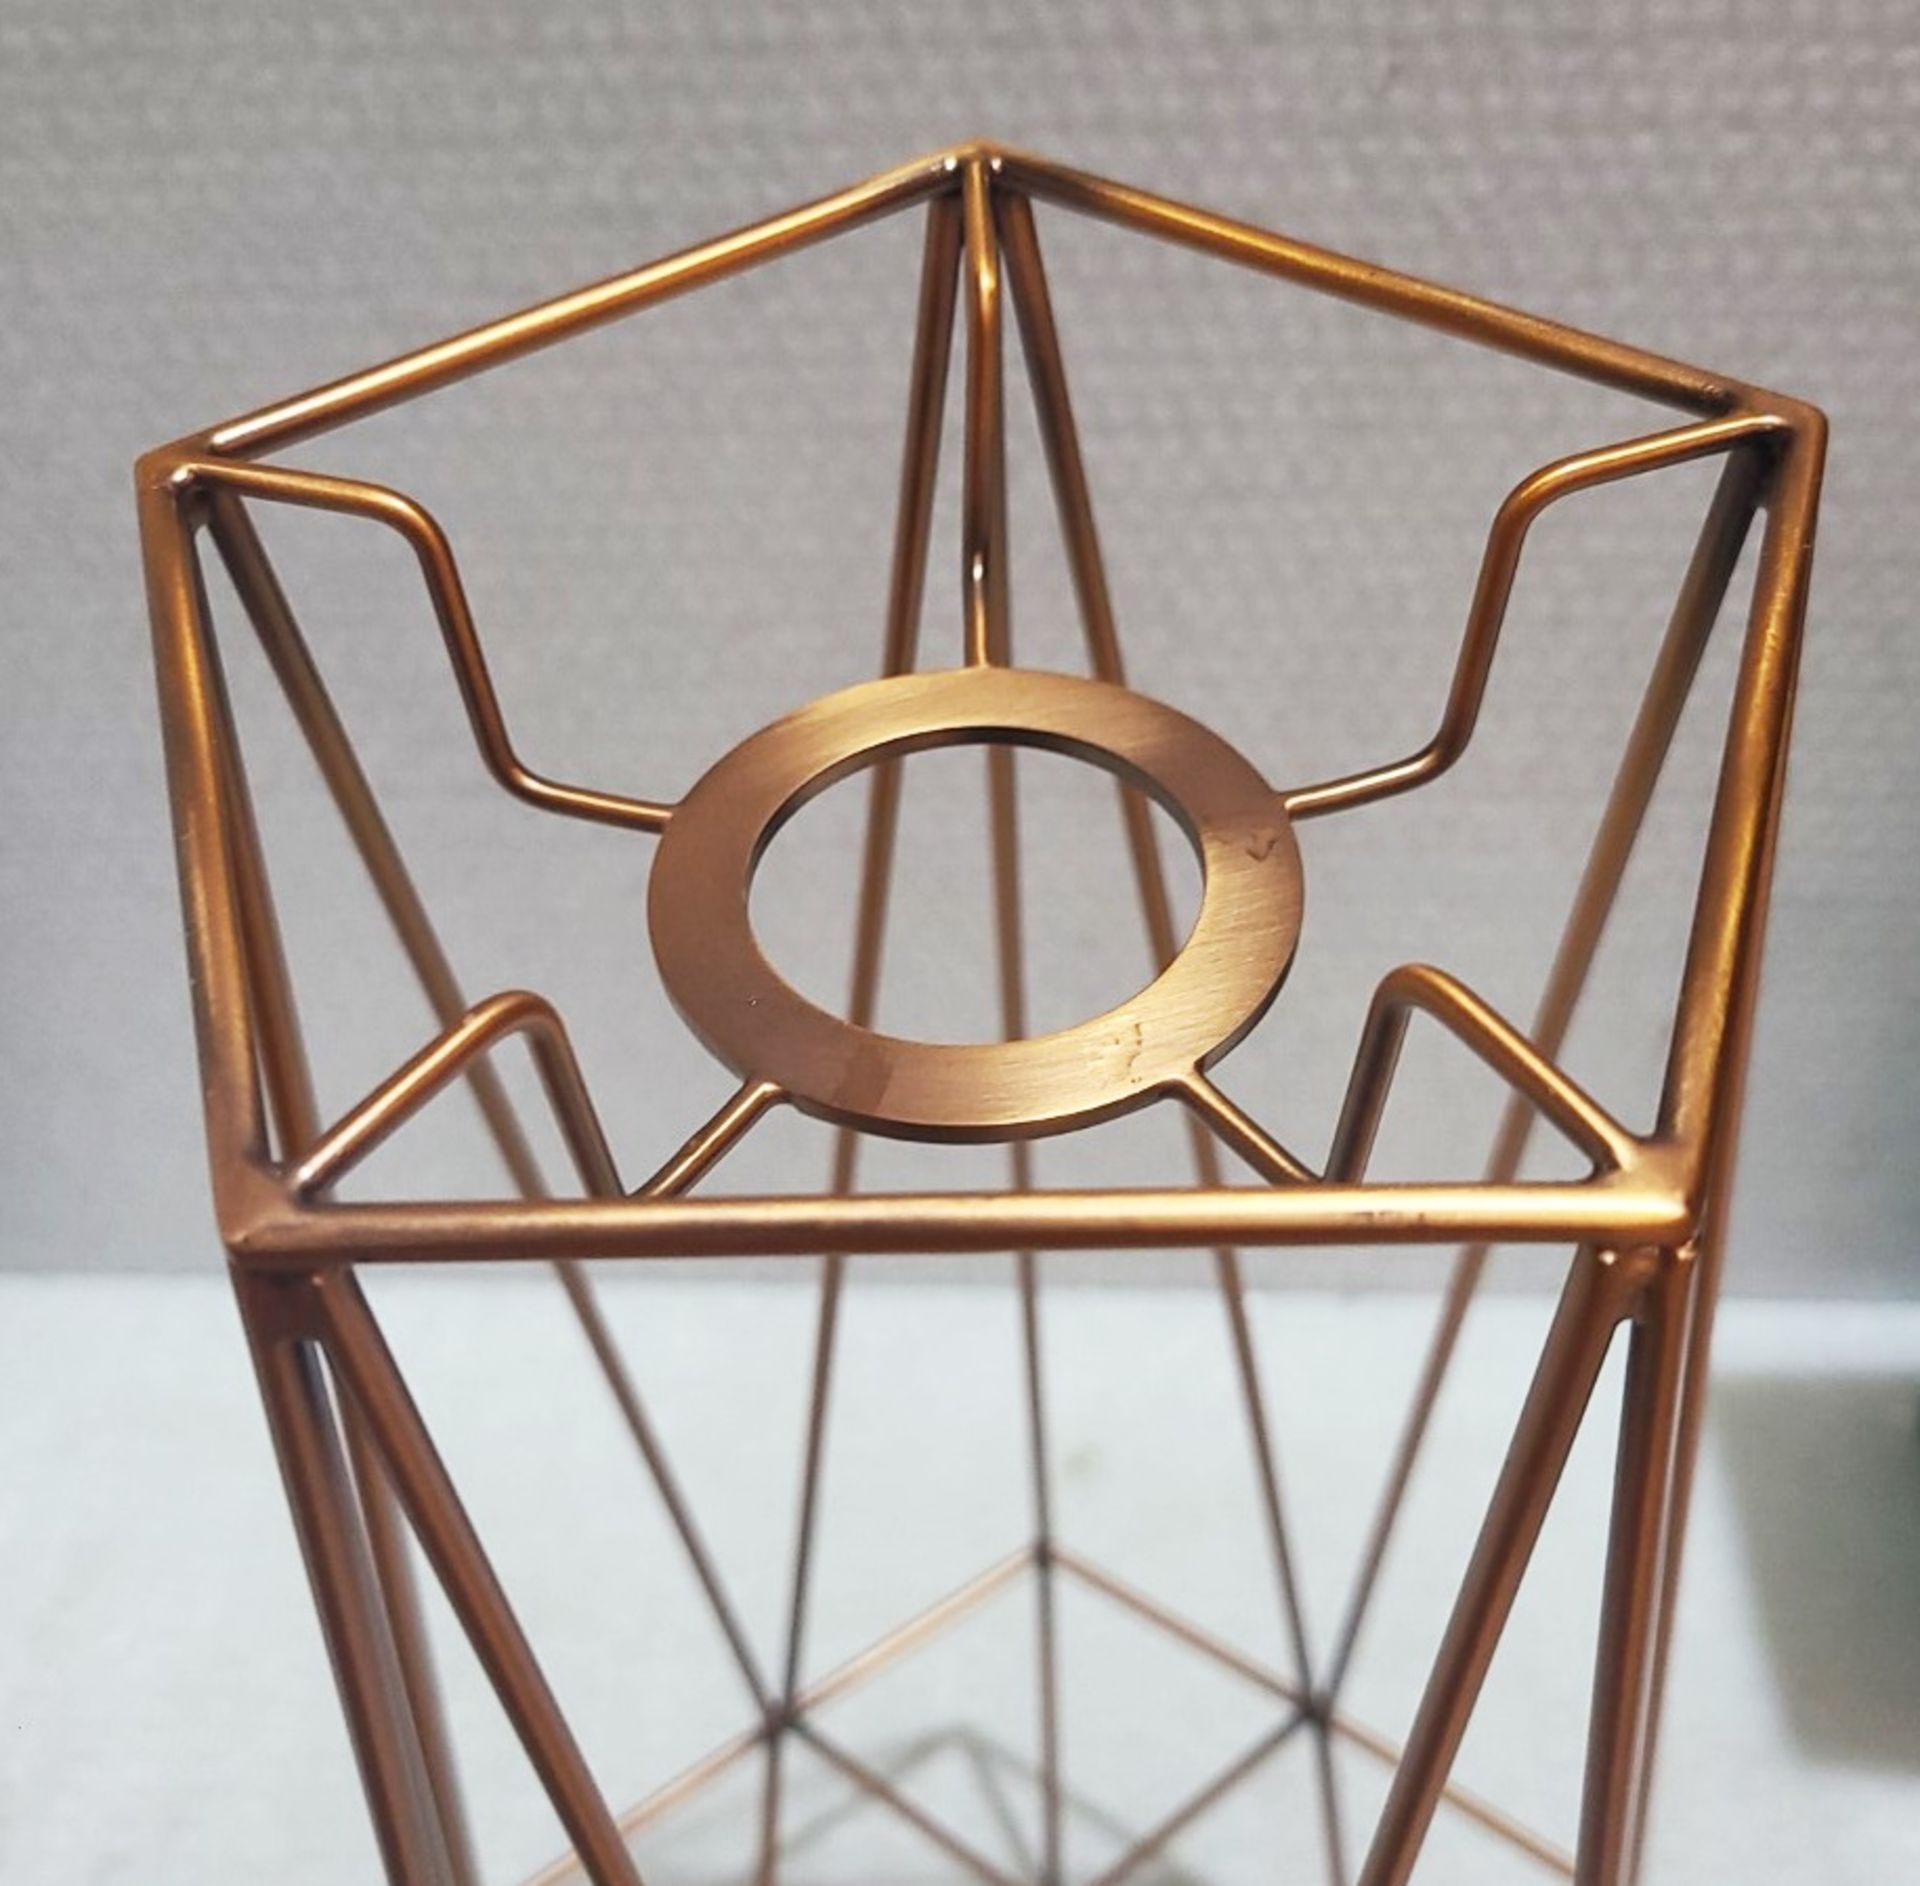 1 x CHELSOM Diamond Table Lamp Copper Metal Cage Shade Geometric Style - Image 4 of 4